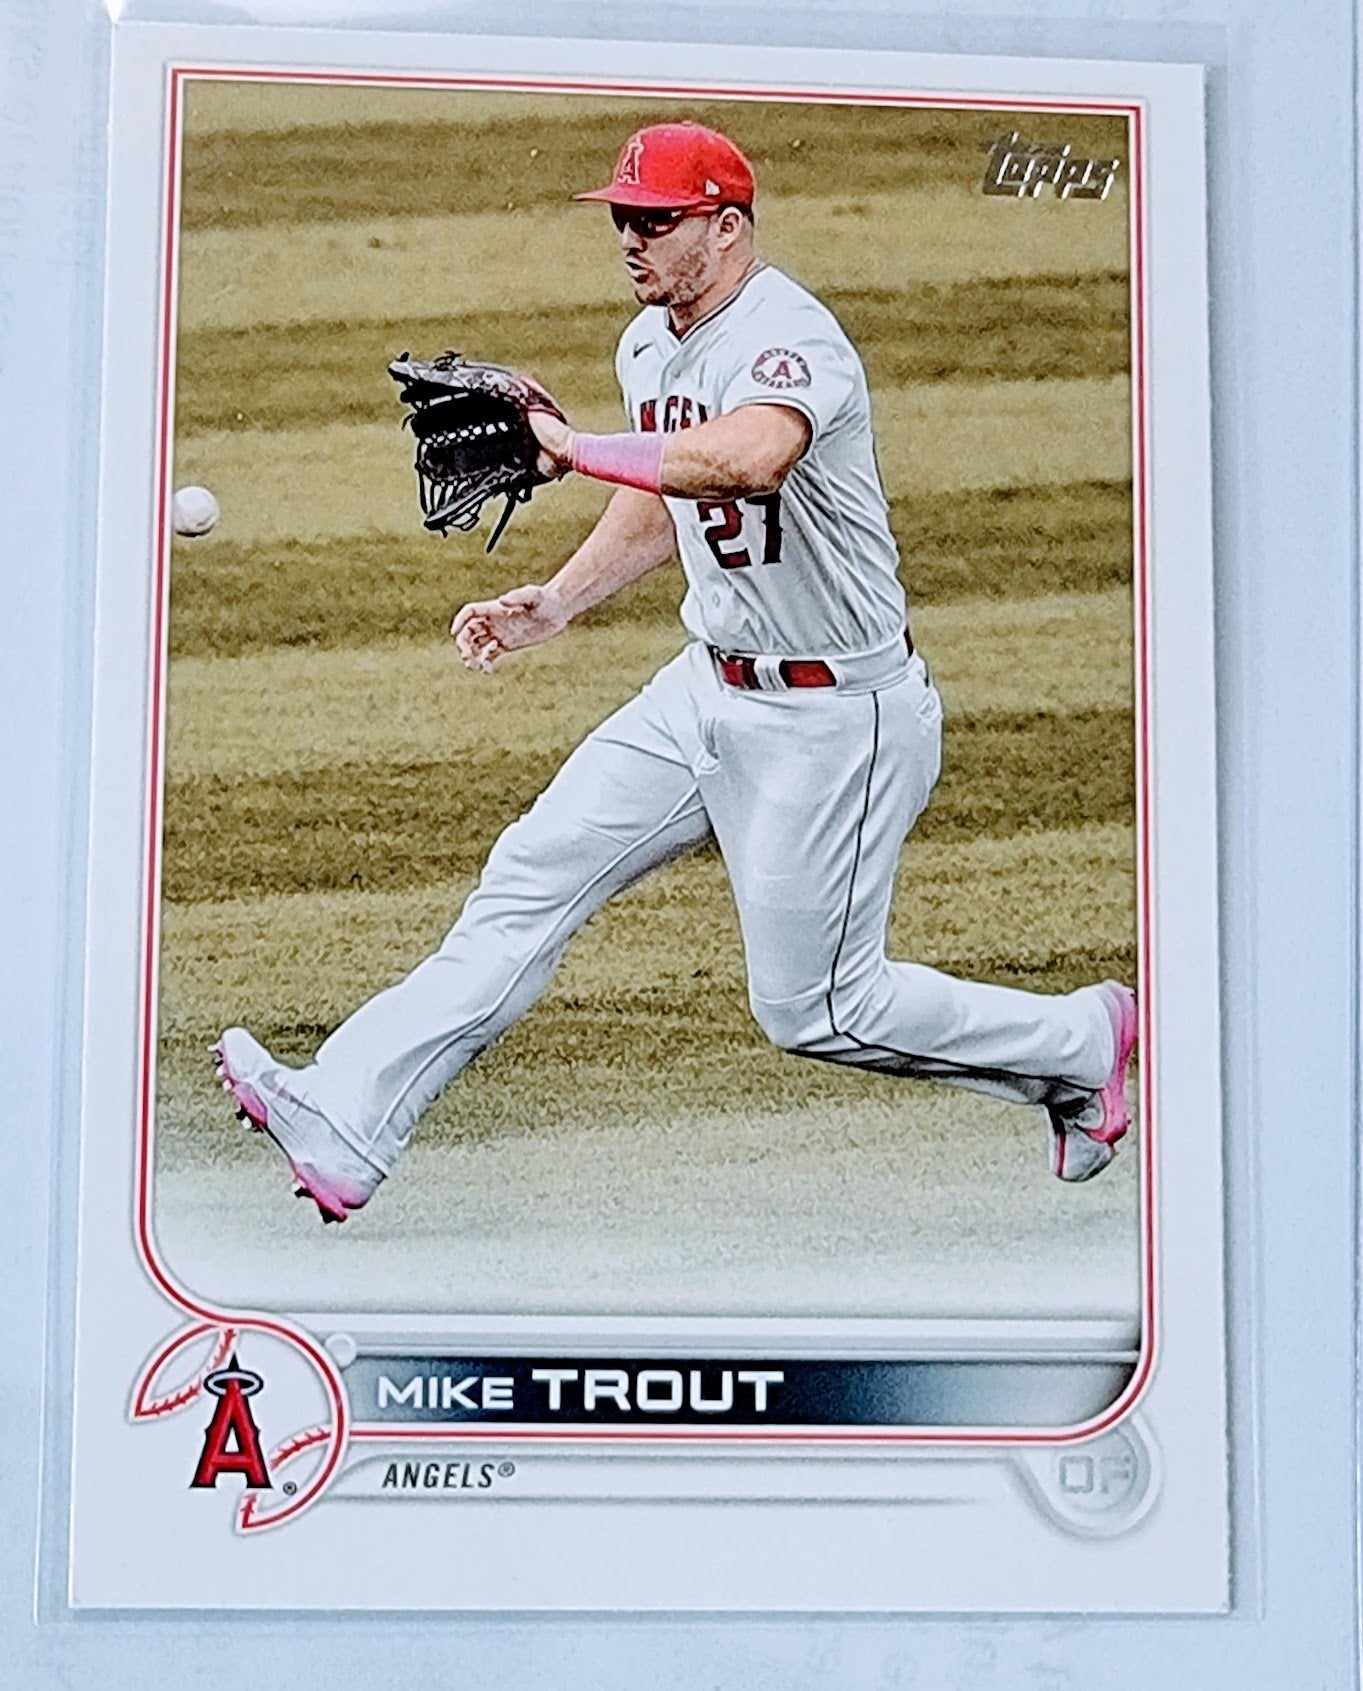 2022 Topps Mike Trout Los Angeles Angels Baseball Trading Card GRB1 simple Xclusive Collectibles   